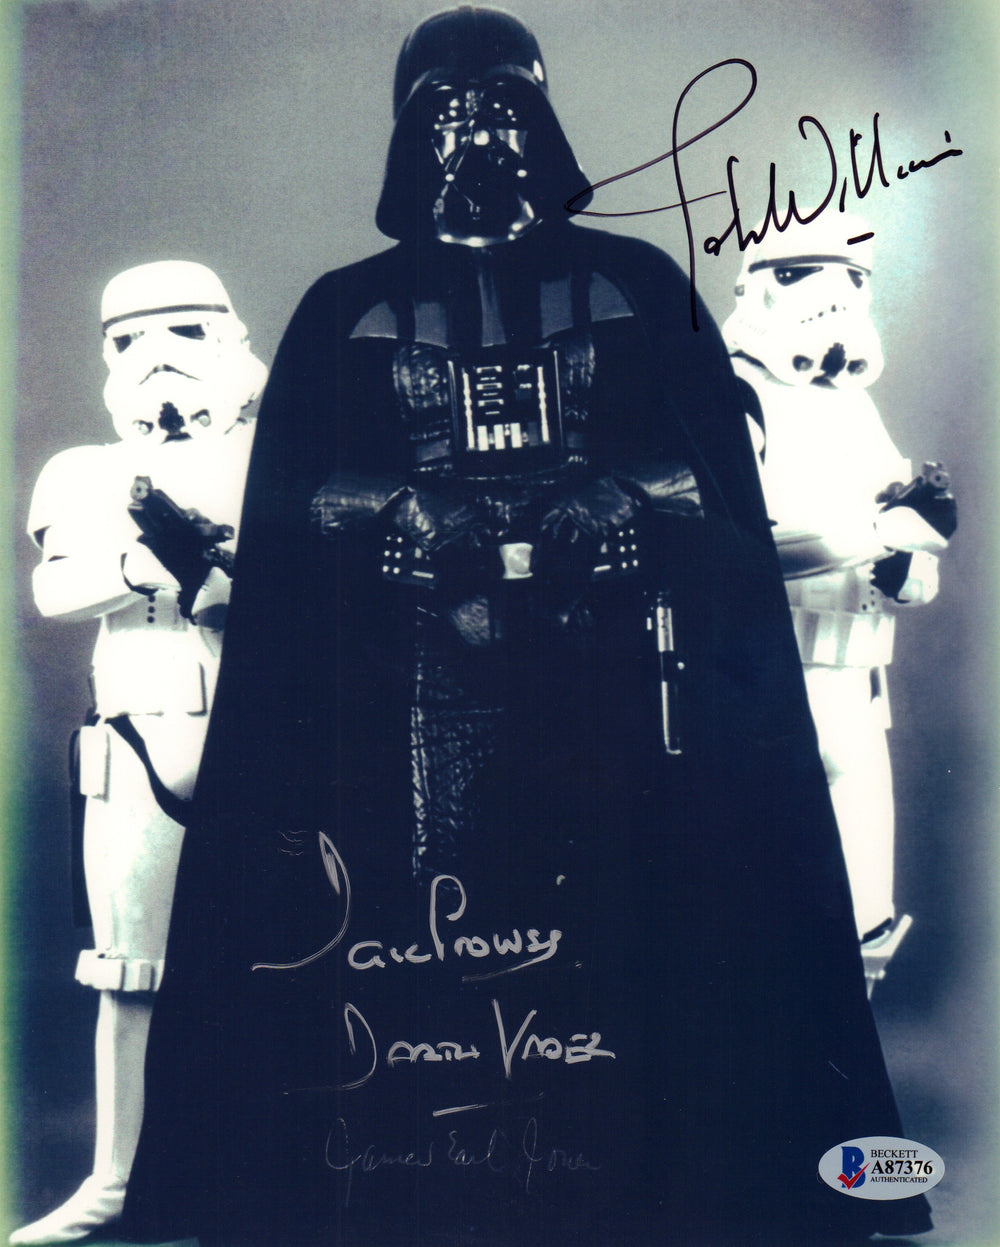 Darth Vader from Star Wars 8x10 Photo Signed by James Earl Jones, Dave Prowse, & Composer John Williams